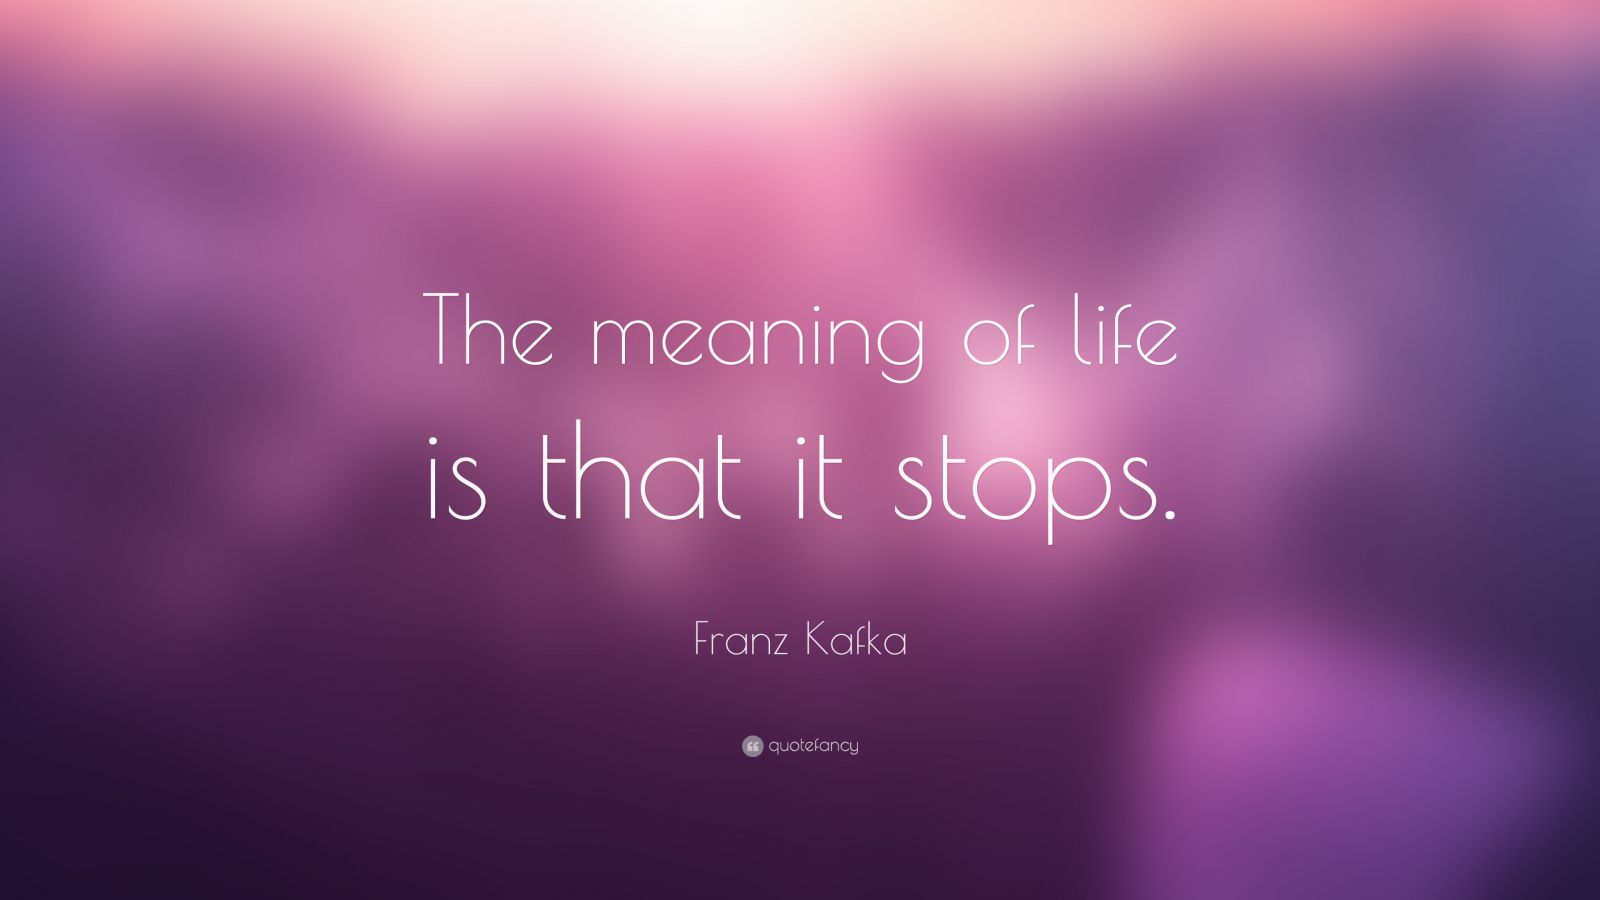 Franz Kafka Quote: “The meaning of life is that it stops.” (12 ...